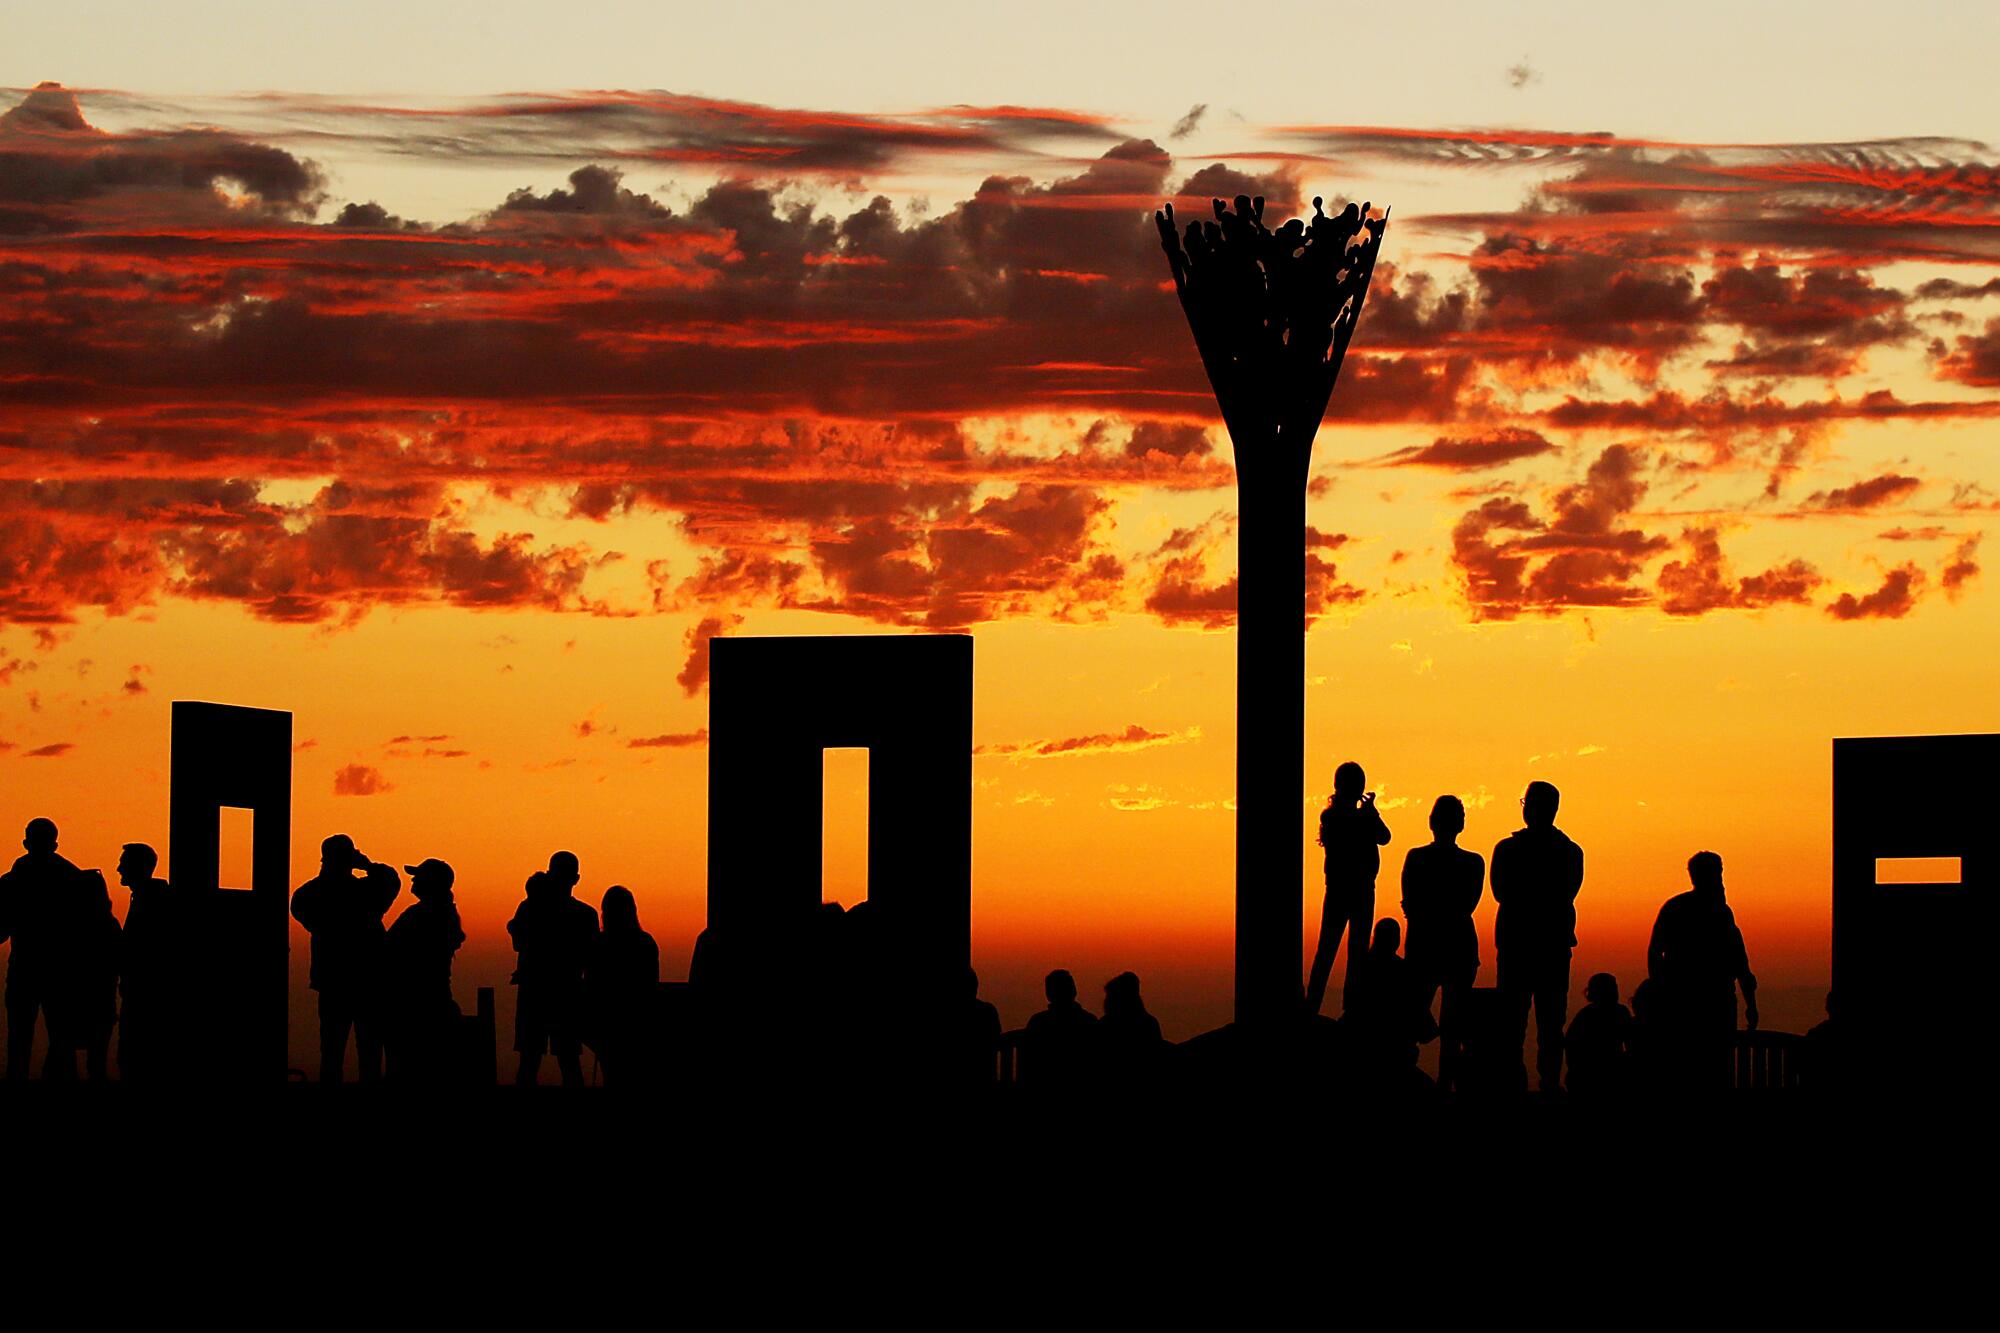 People and objects are silhouetted against an orange sky with clouds.